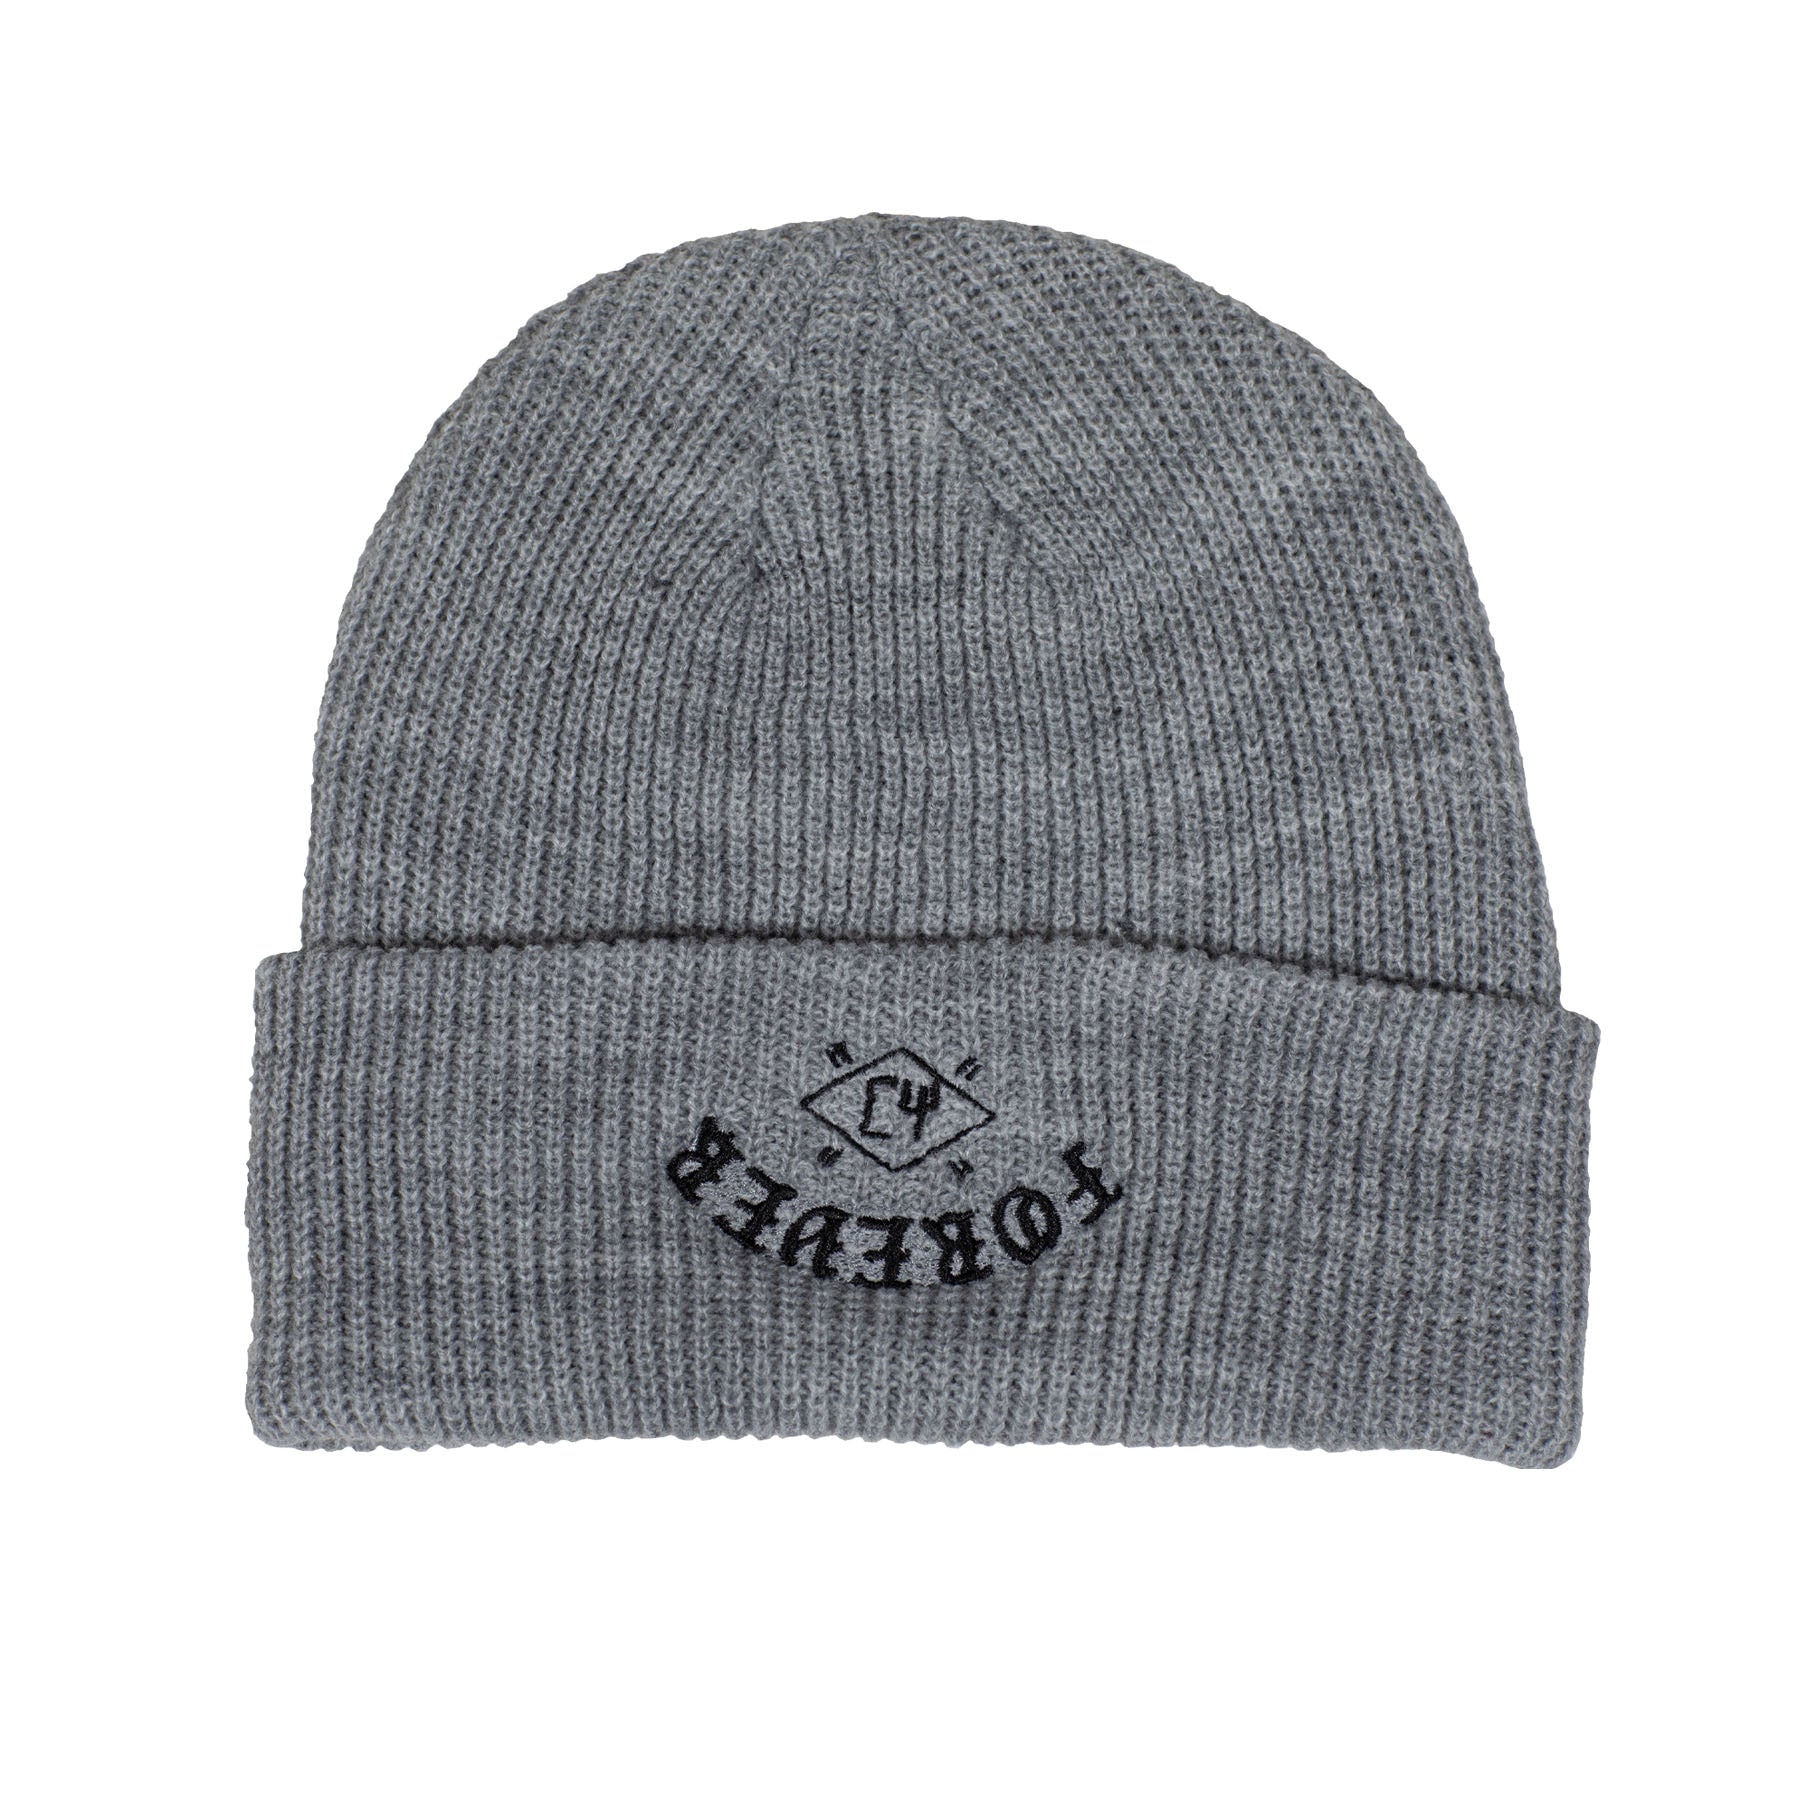 FOREVER BEANIE - commonyouthbrand